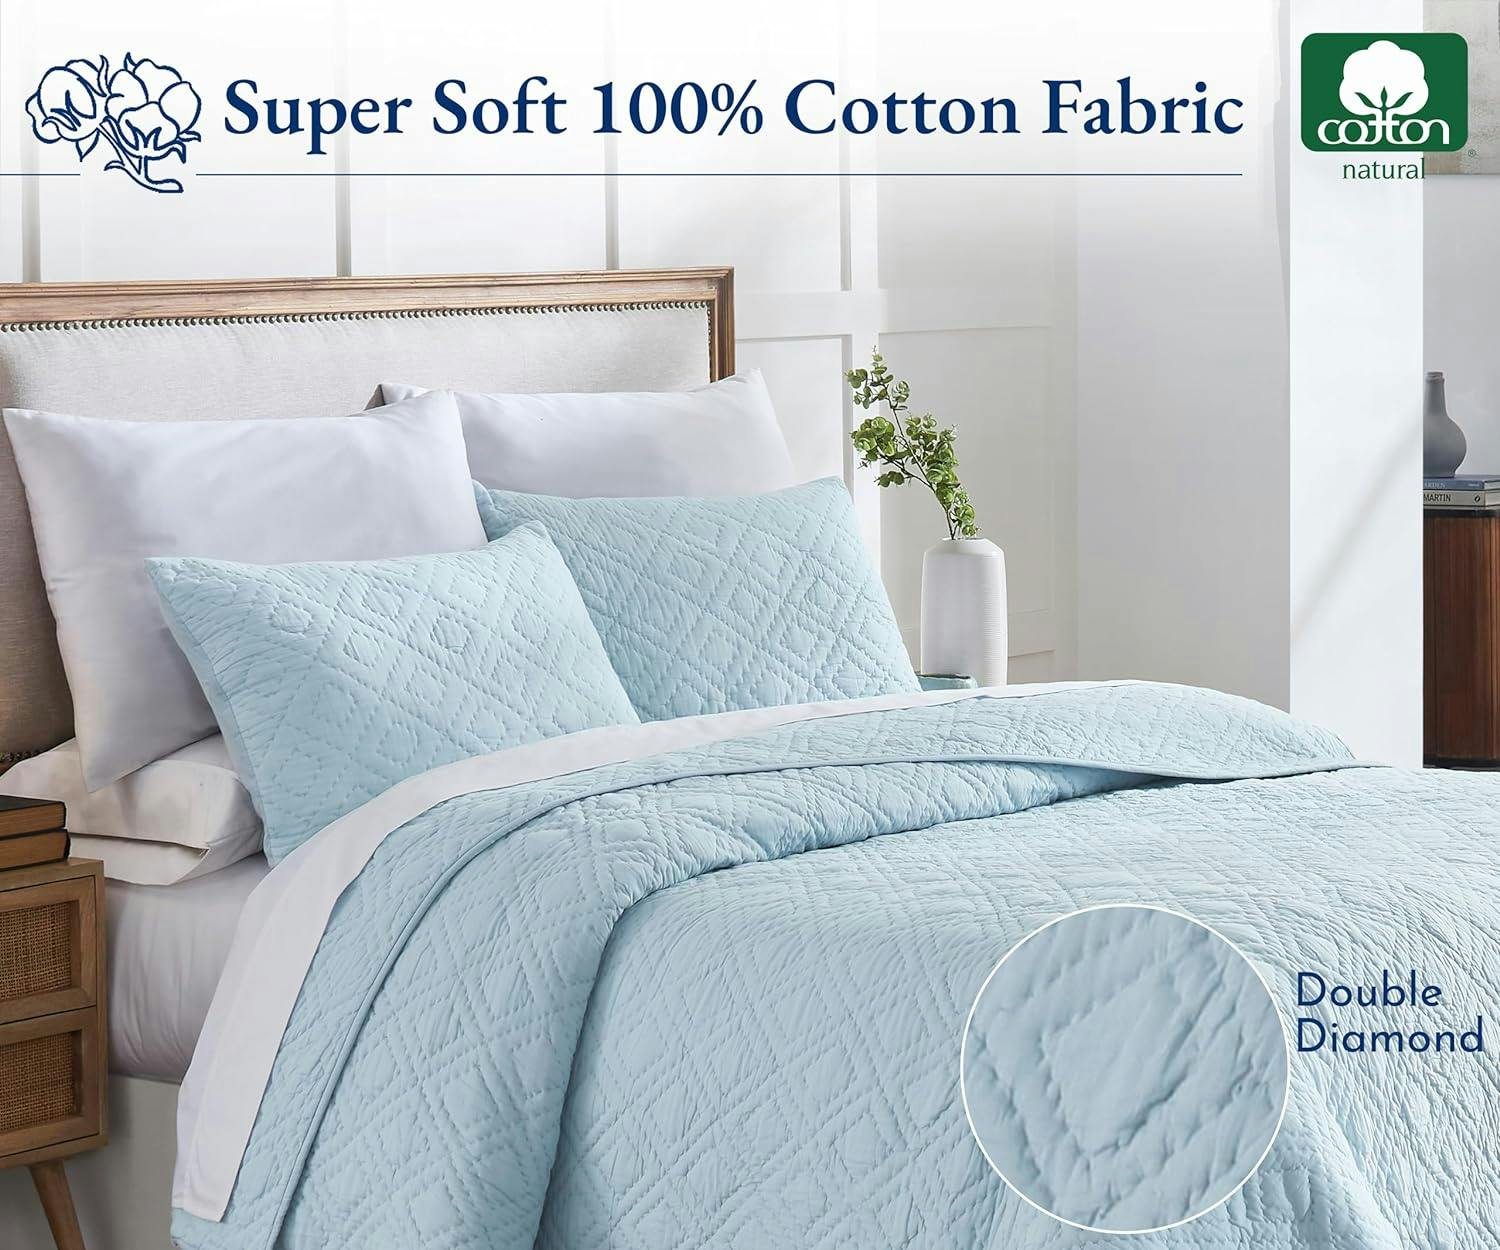 Luxurious Hand-Quilted Cotton Full/Queen Quilt Set in Serene Blue